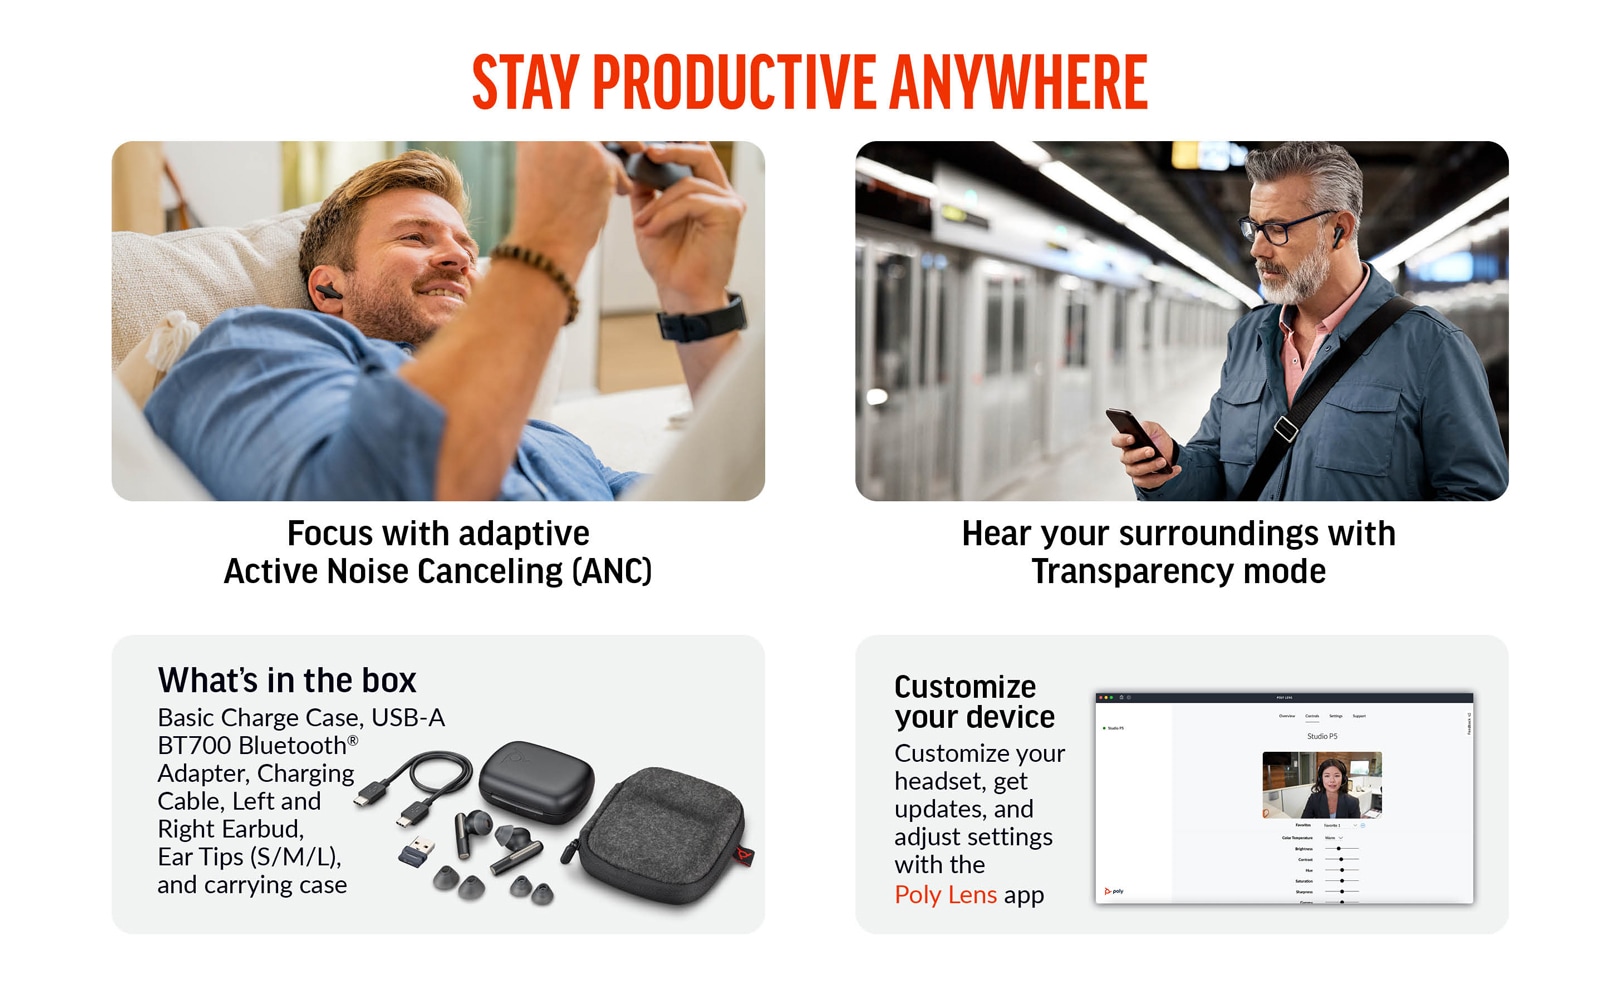 Stay productive anywhere